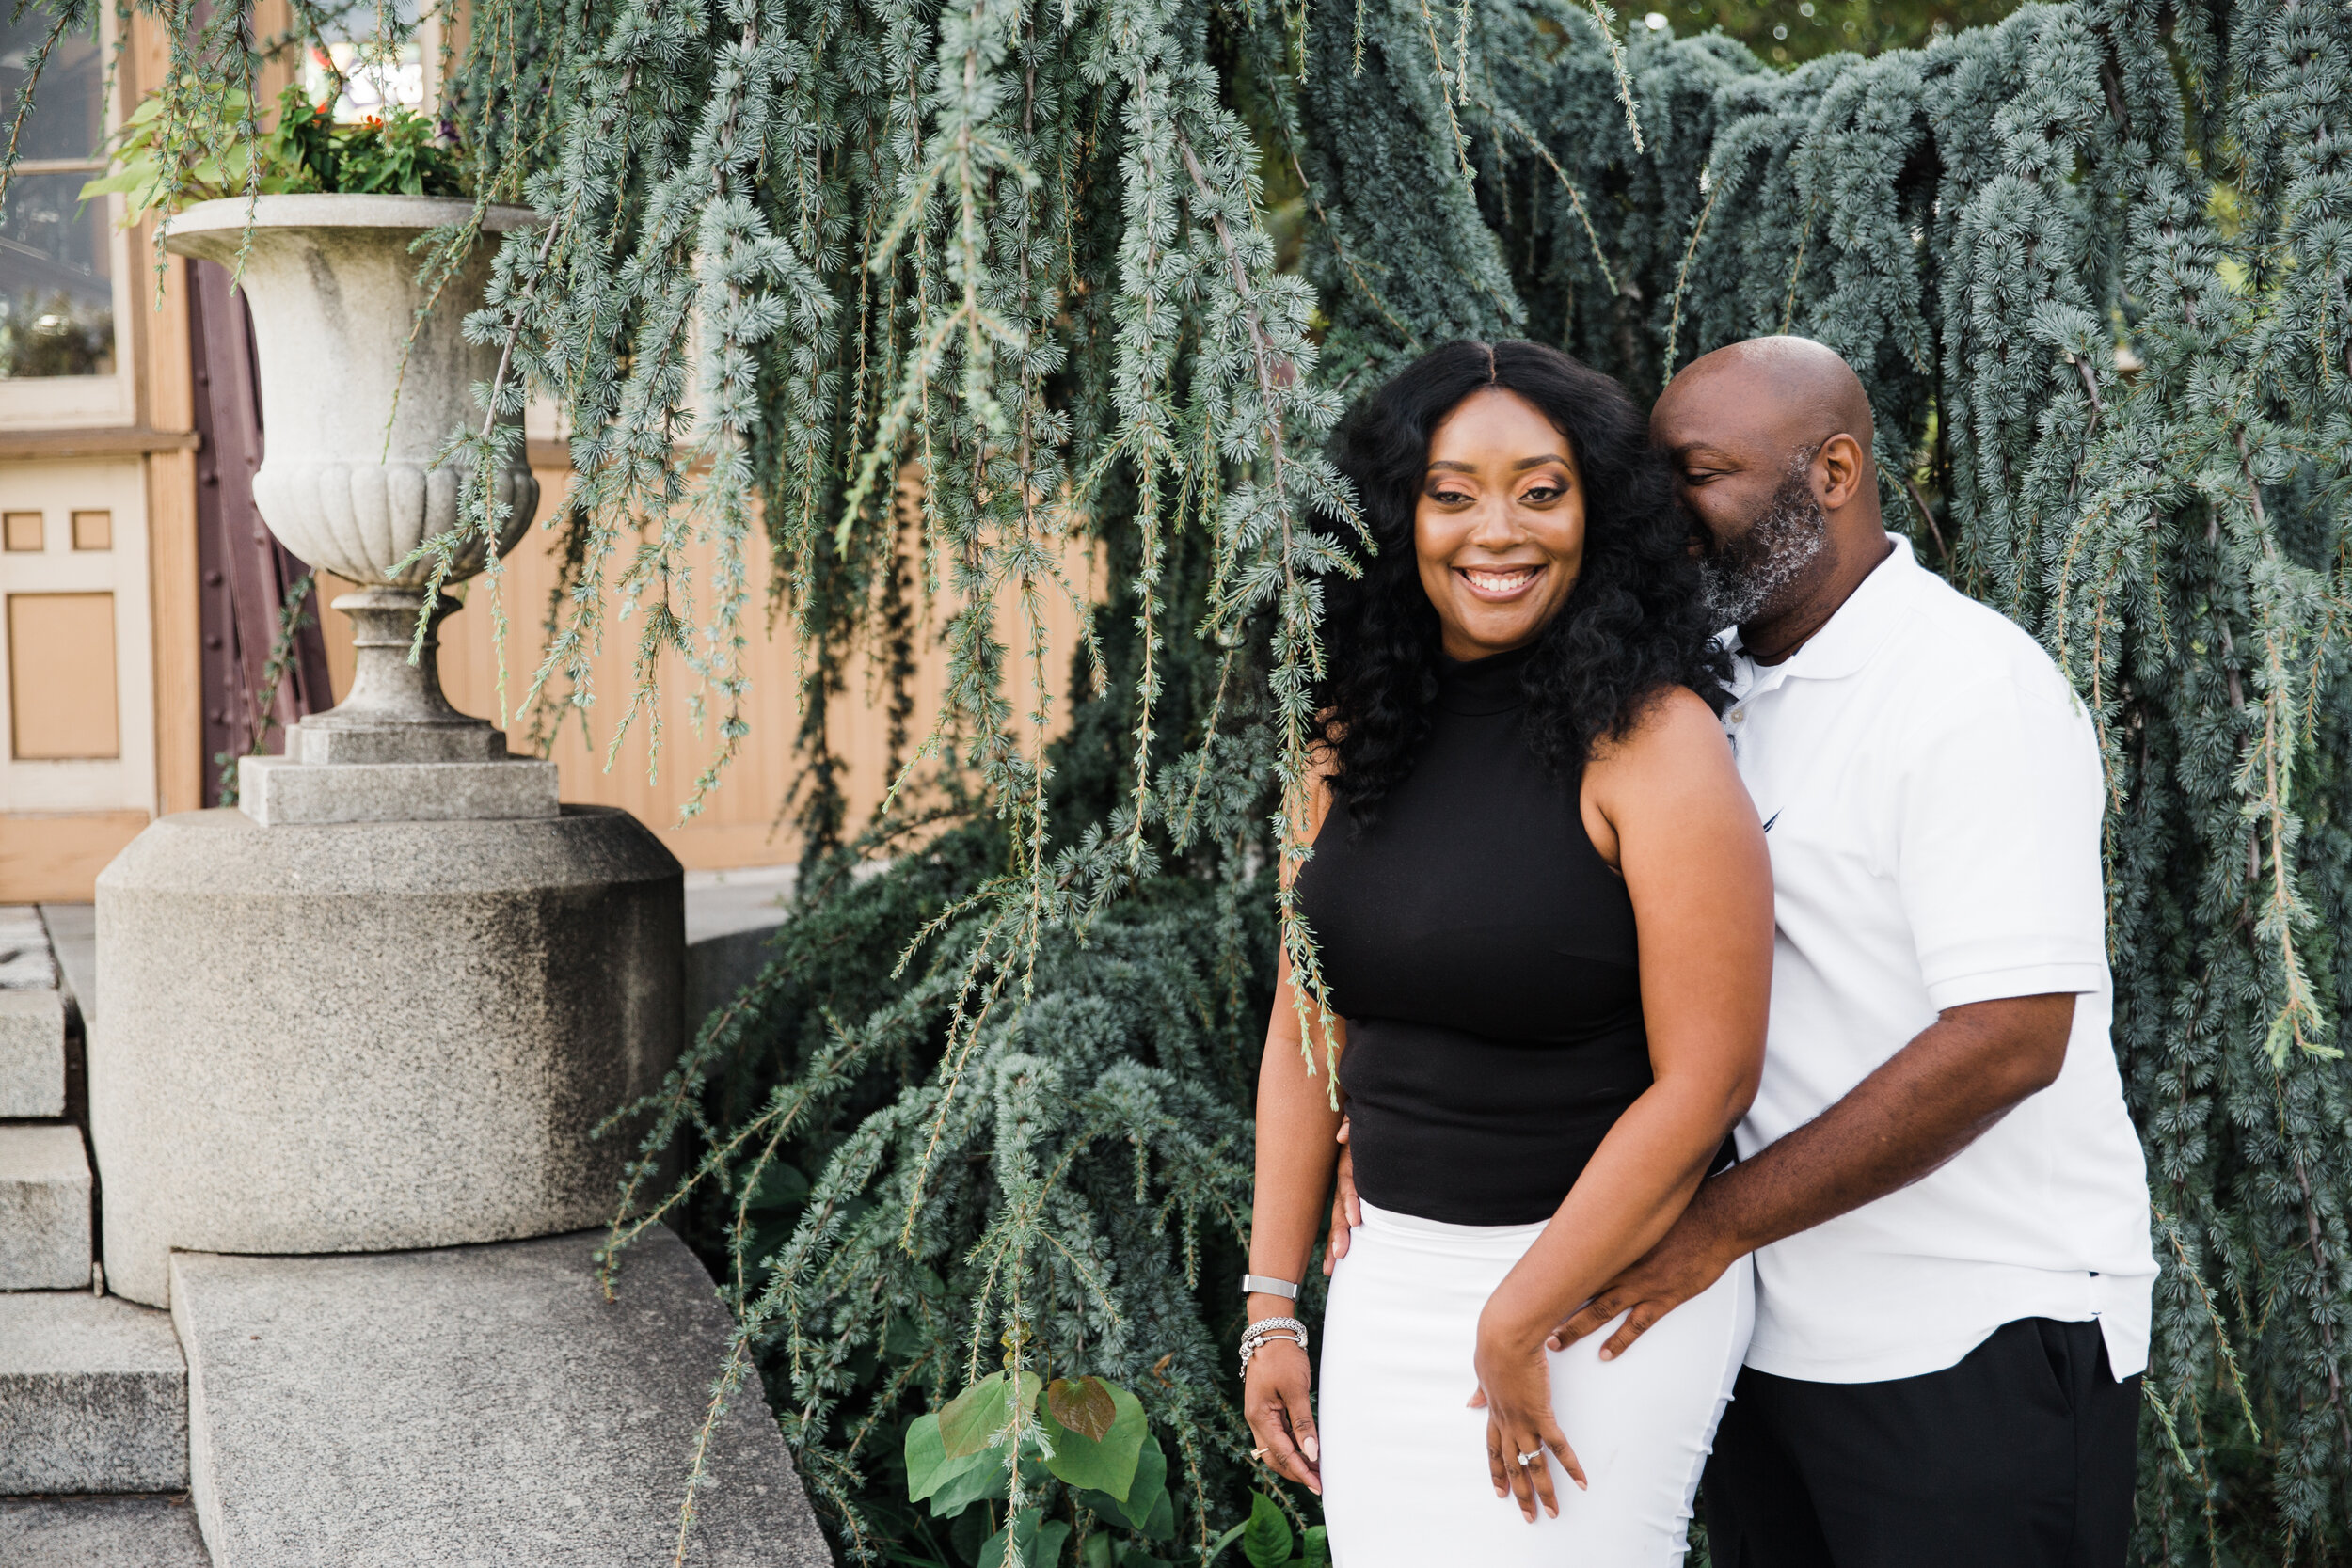 Patterson Park Engagement Session with Black Photographers Megapixels media in Baltimore Maryland (10 of 32).jpg